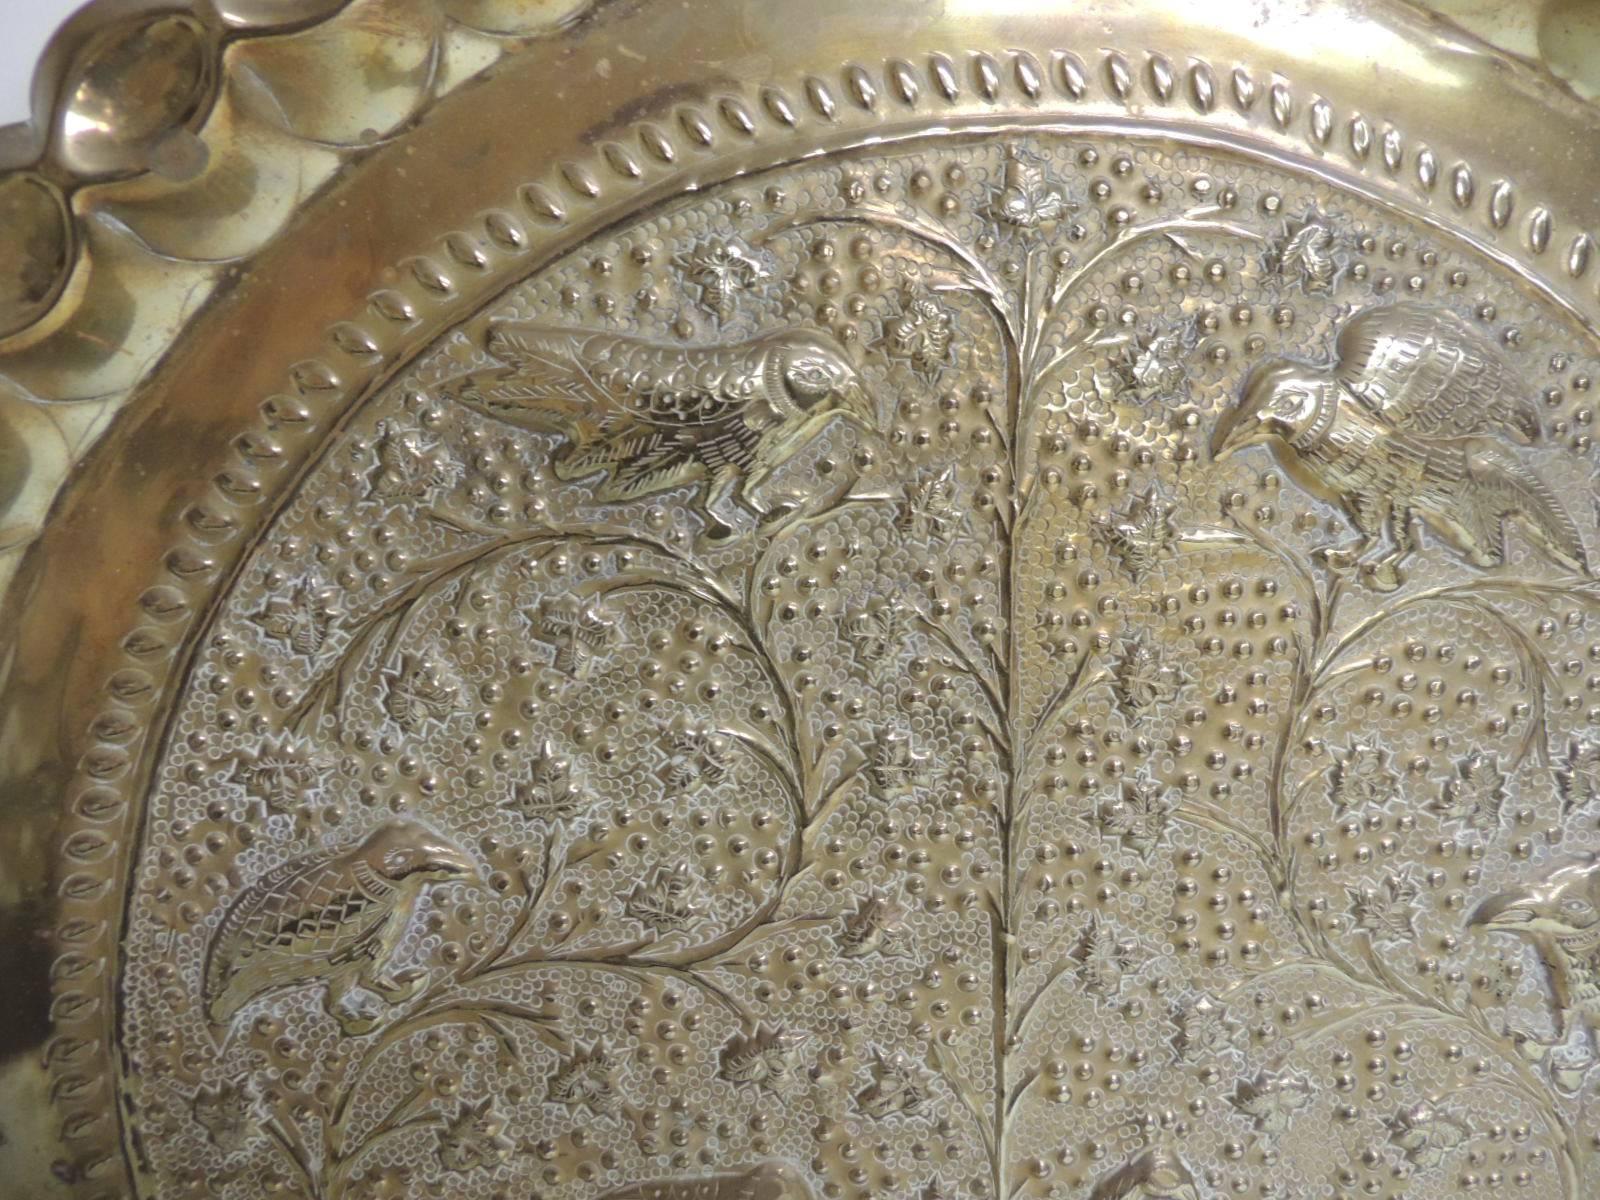 Vintage Persian brass round tray depicting the tree of life and birds. The repousse style tray with pinched edging all around top. Small hanging hook in the back.
Size: 19